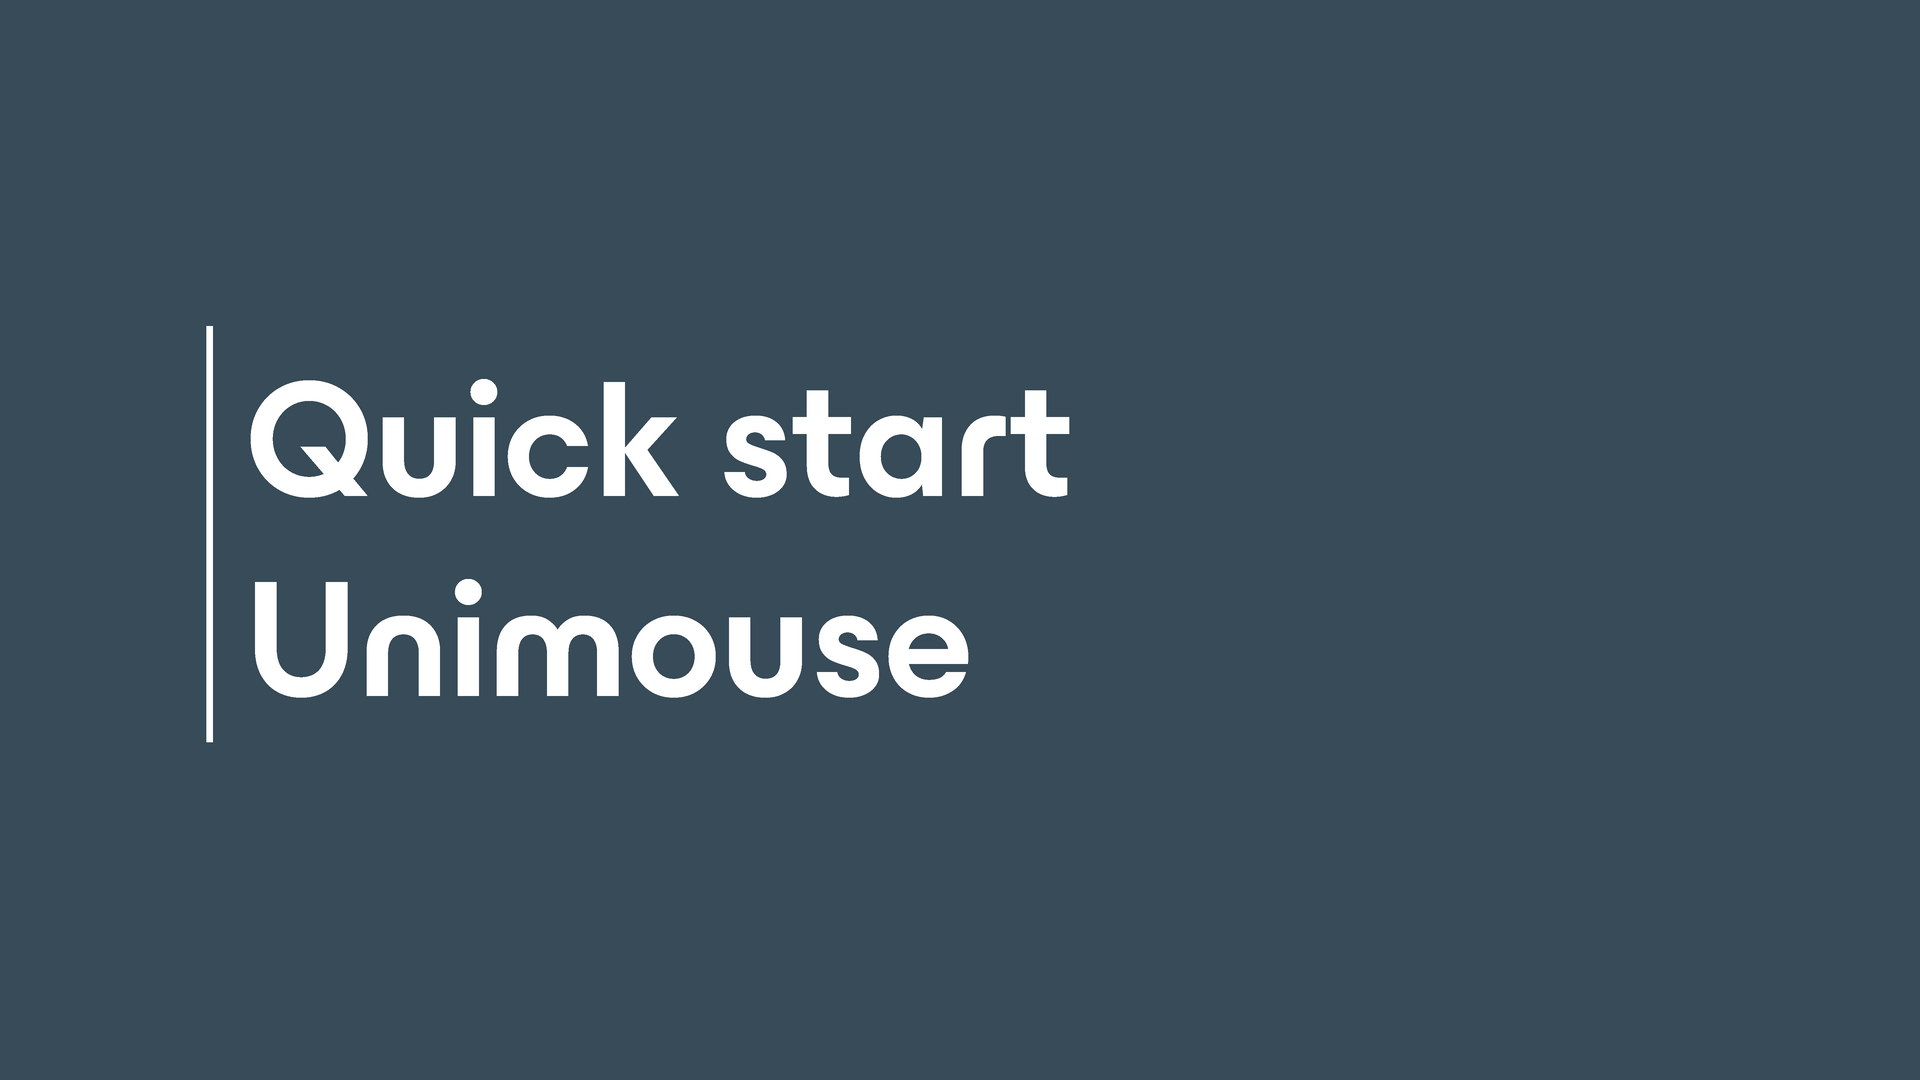 Quick start guide: how to get started with Unimouse from Contour Design